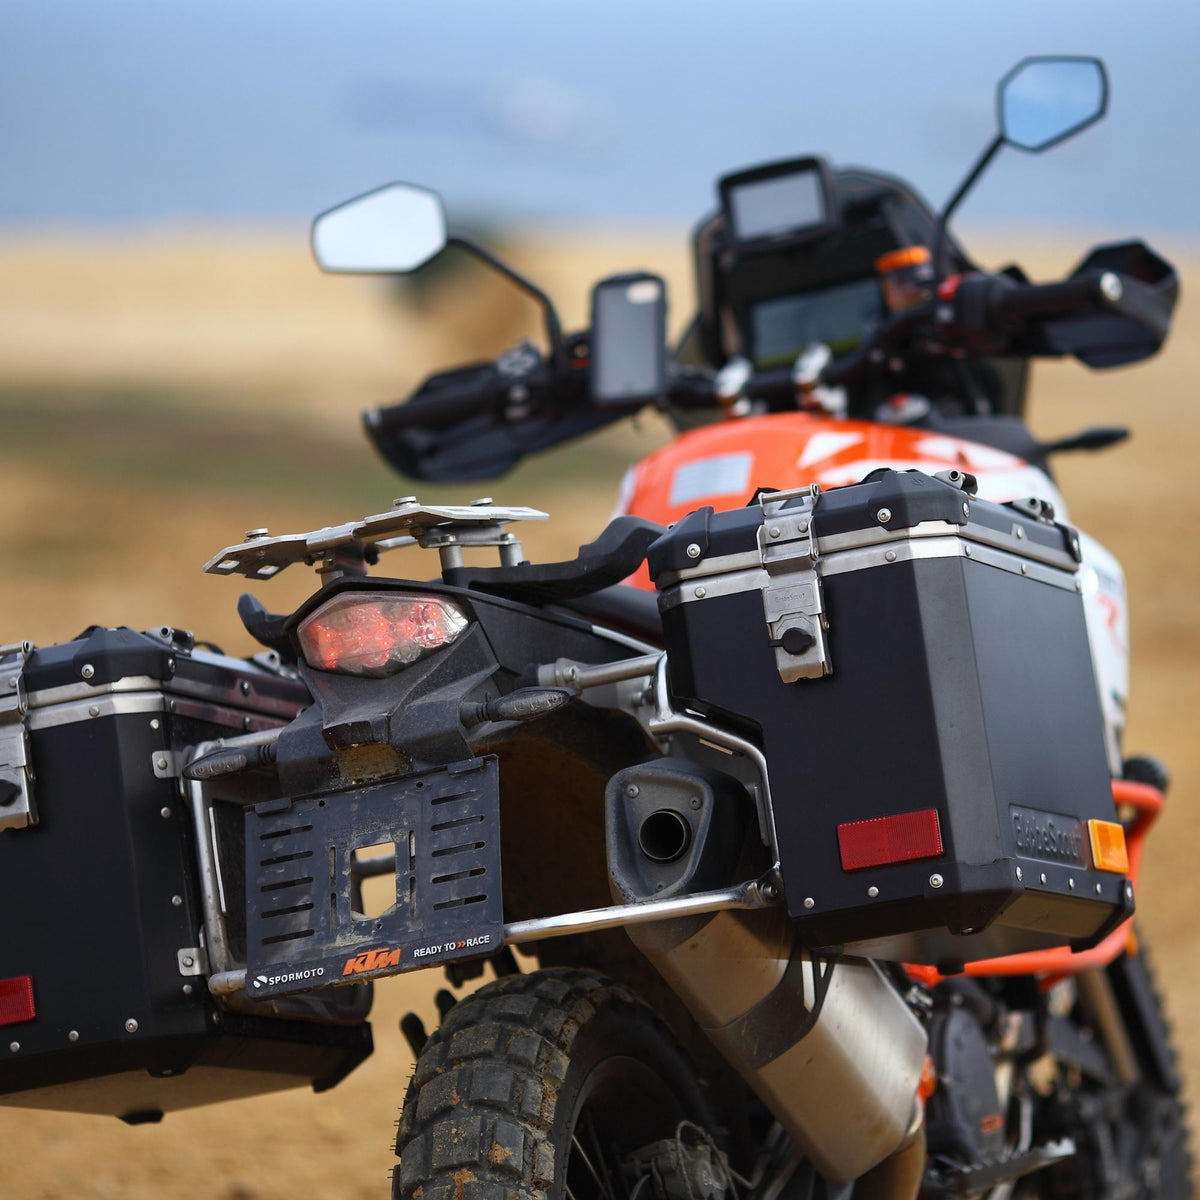 XPAN+ Aluminum Side Case Set, KTM 1050 / 1190 / 1290 Adventure (2013- 2020), 2.02.02801, adventure bike luggage, adventure motorcycle panniers, aluminum side cases, GlobeScout motorcycle luggage, GlobeScout XPAN+, KTM, KTM 1050, KTM 1190, KTM 1290 Adventure, Side Case Sets, XPAN+, Side Case Sets - Imported and distributed in North &amp; South America by Lindeco Genuine Powersports - Premier Powersports Equipment and Accessories for Motorcycle Enthusiasts, Professional Riders and Dealers.